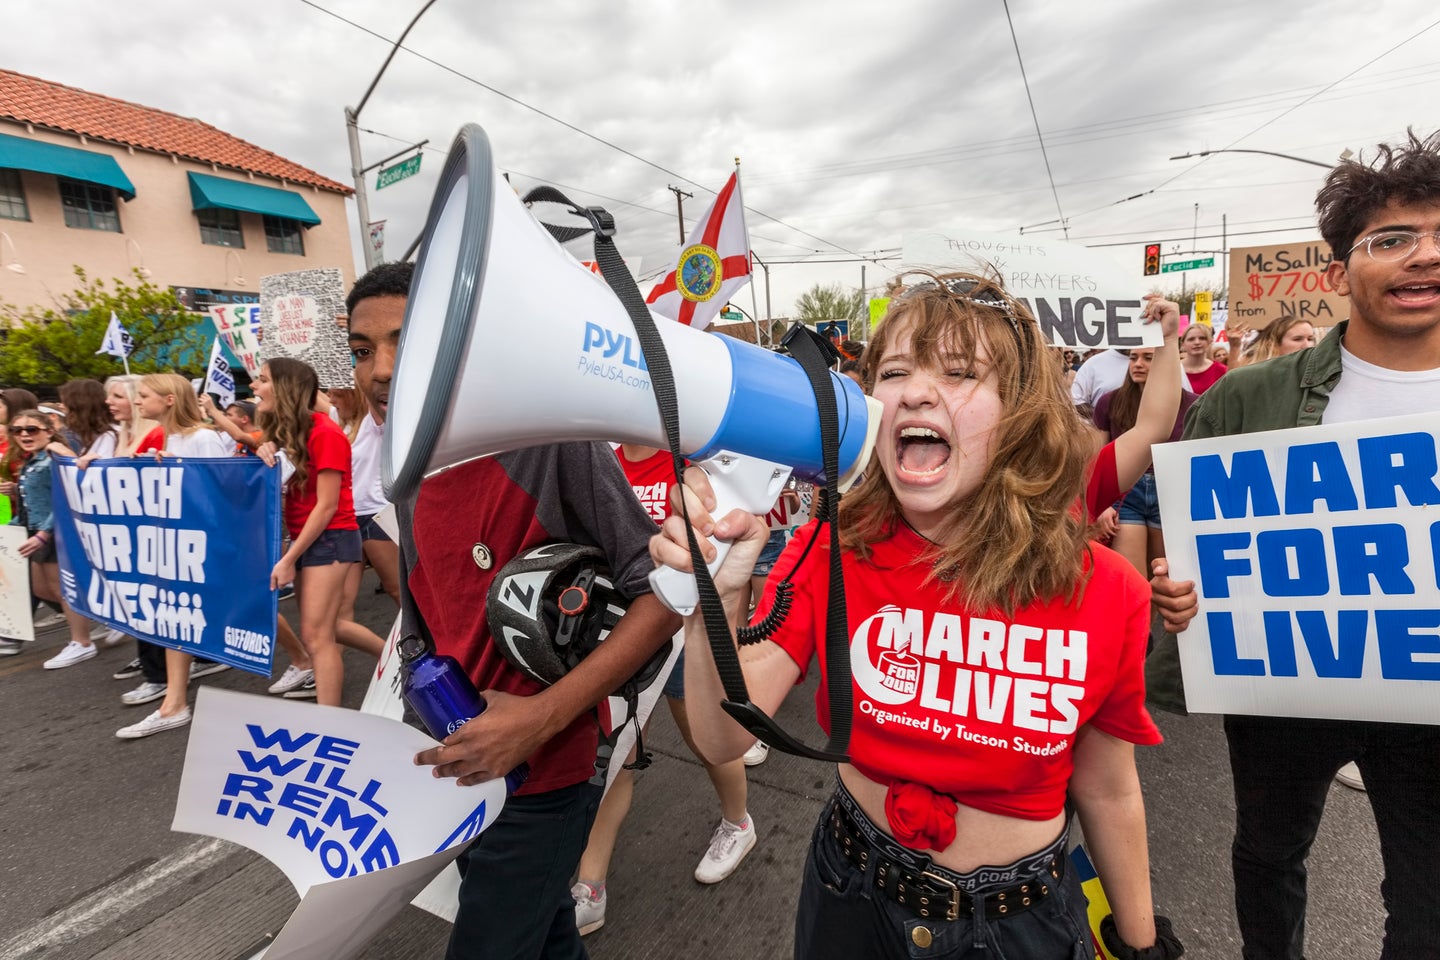 March For Our Lives teen protesters speaking out for gun control after mass shootings